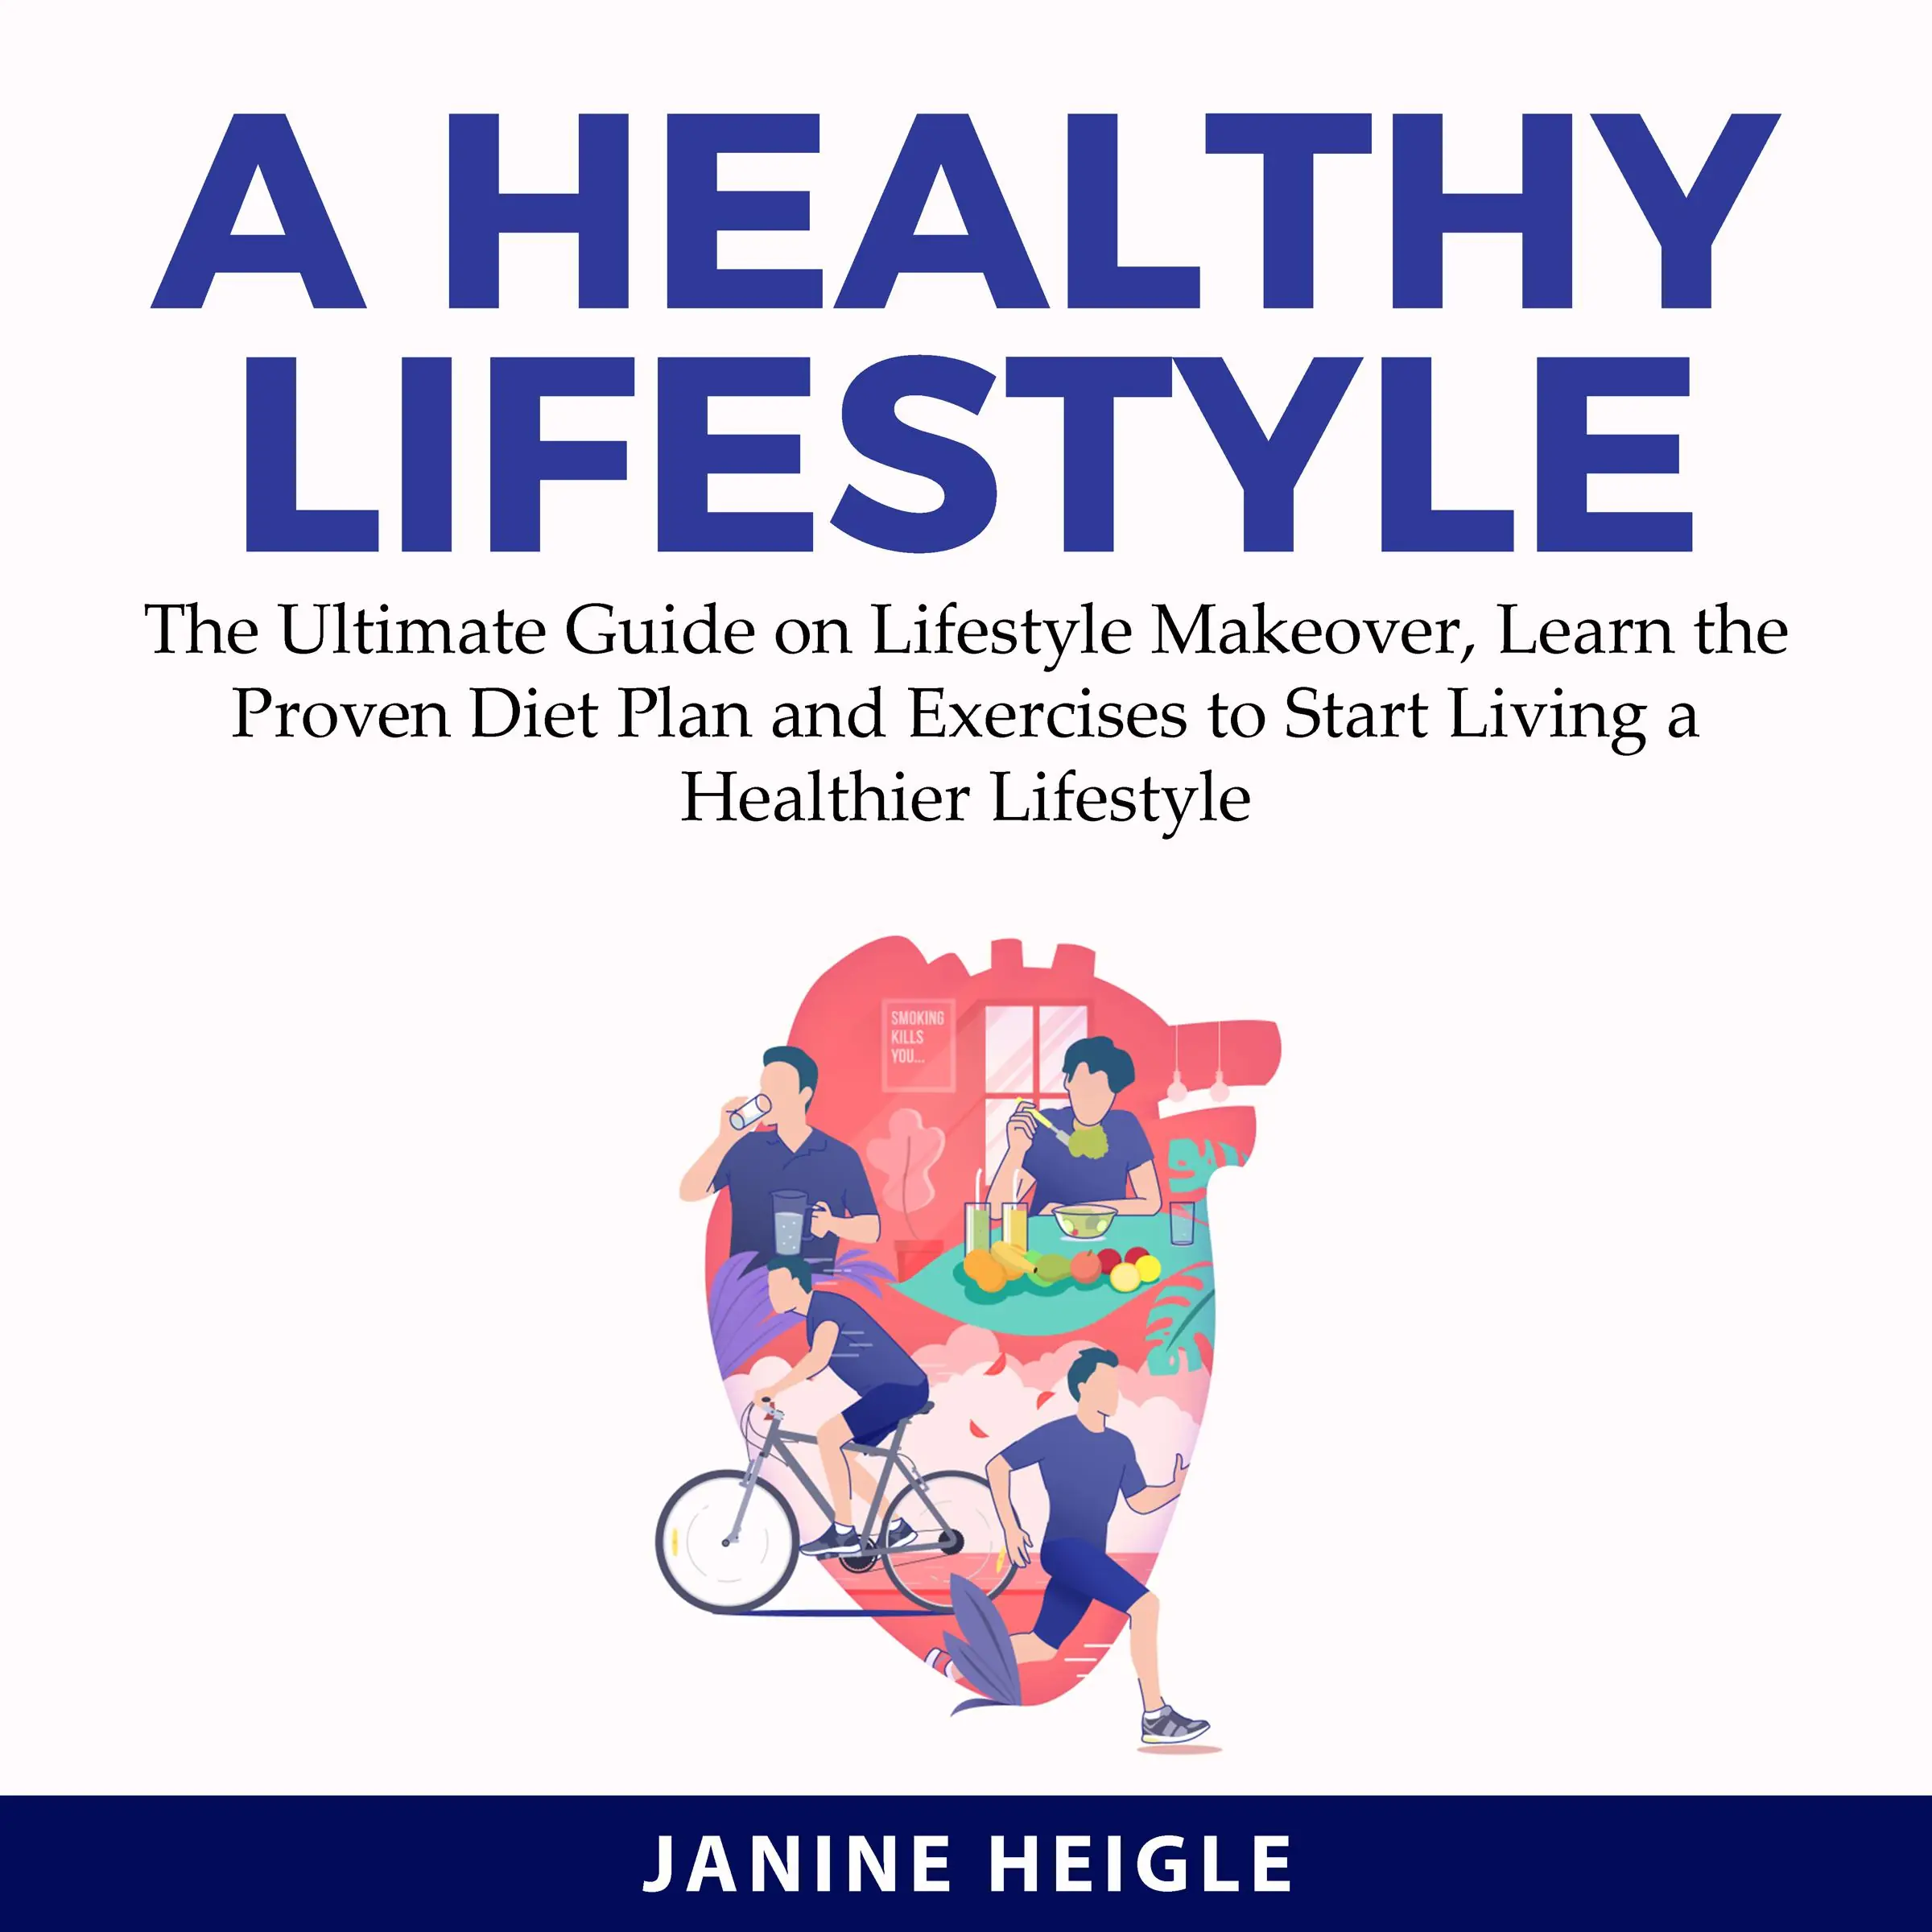 A Healthy Lifestyle: The Ultimate Guide on Lifestyle Makeover, Learn the Proven Diet Plan and Exercises to Start Living a Healthier Lifestyle Audiobook by Janine Heigle